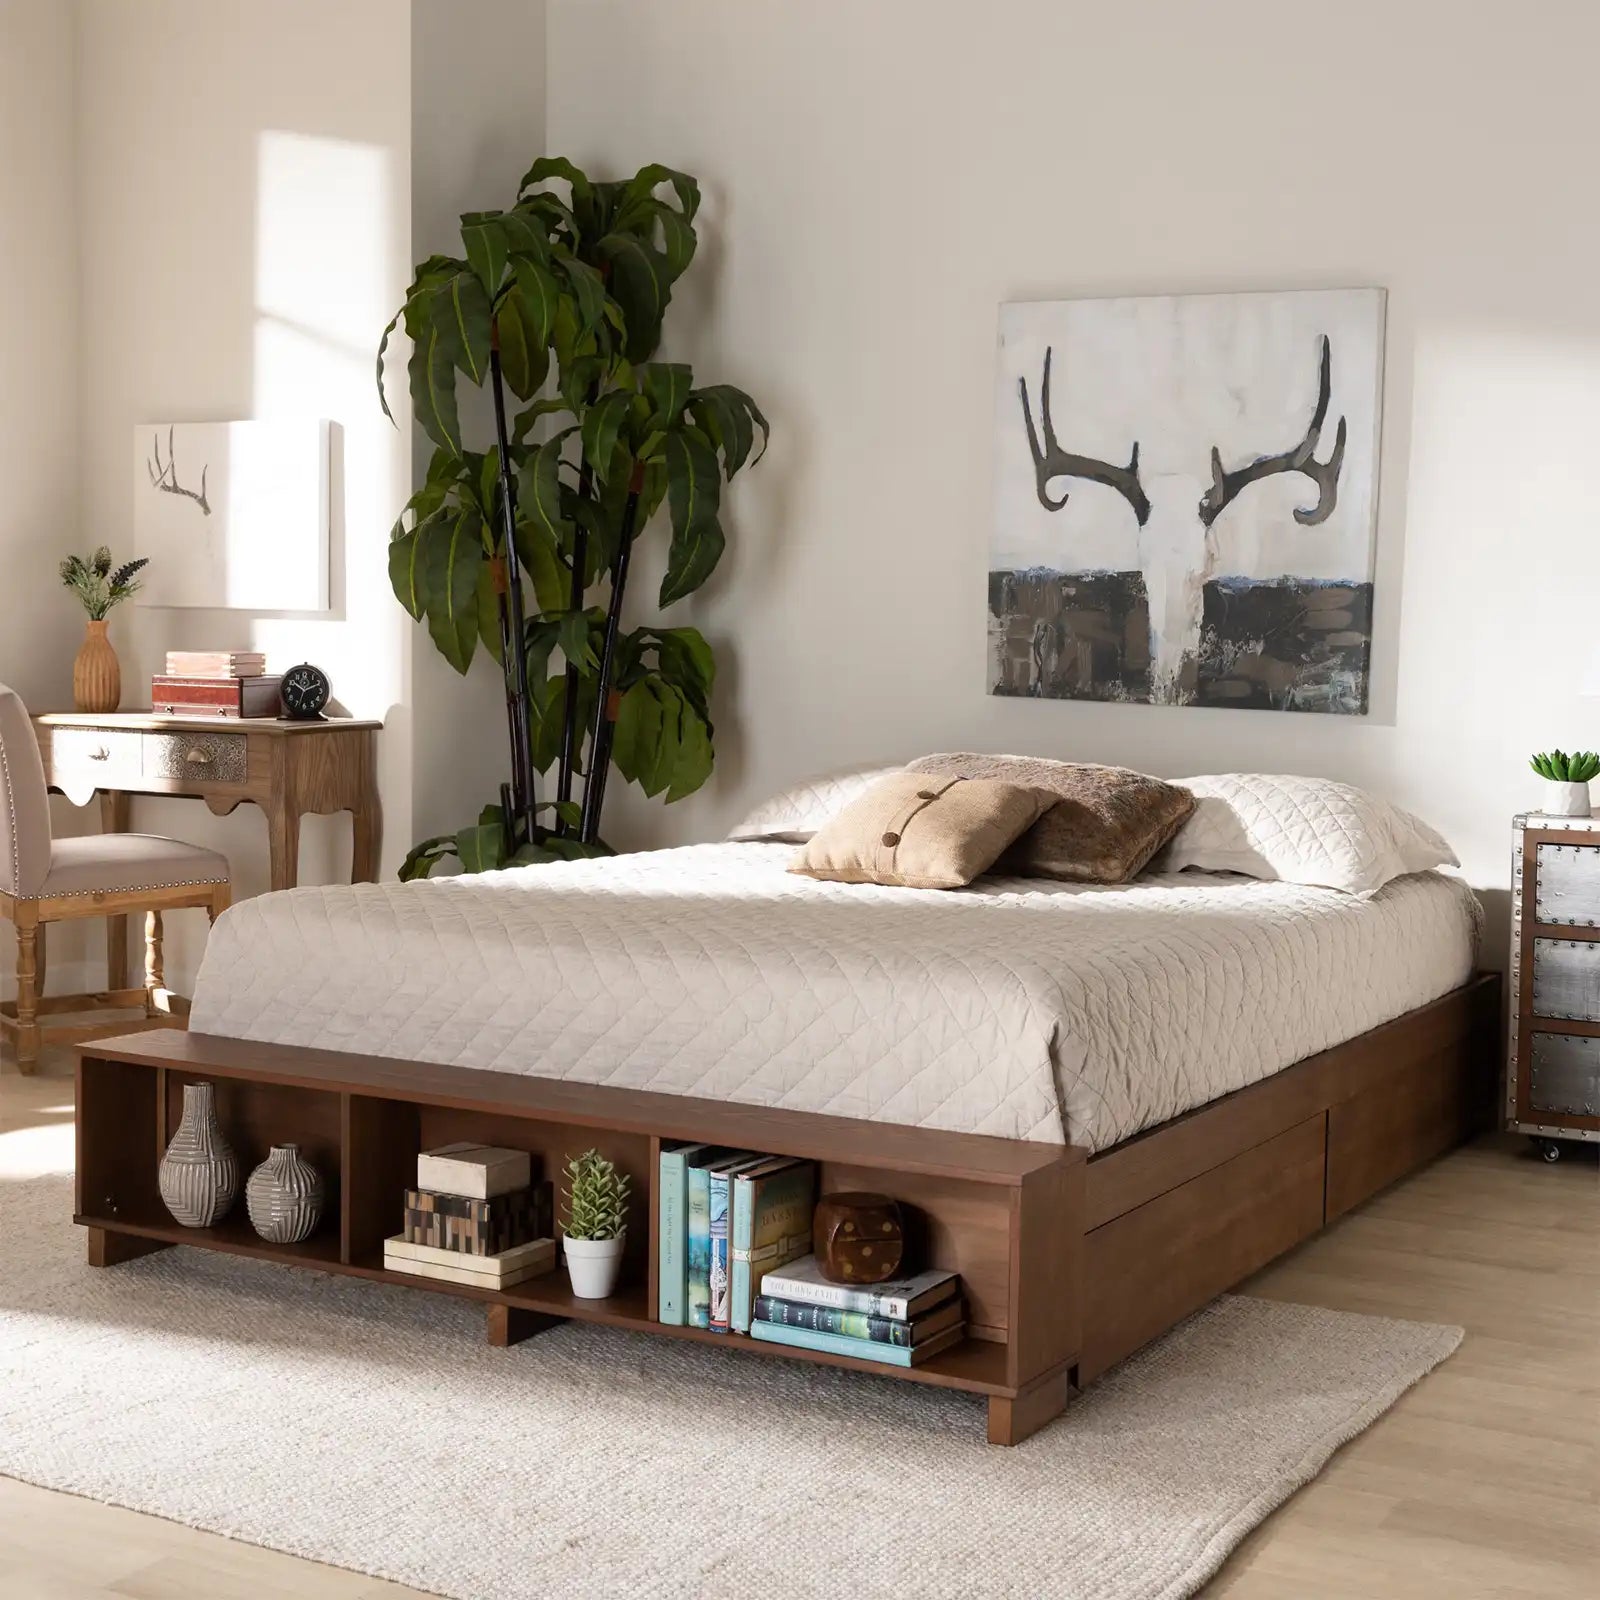 Platform Bed with Built-In Shelves and Drawers